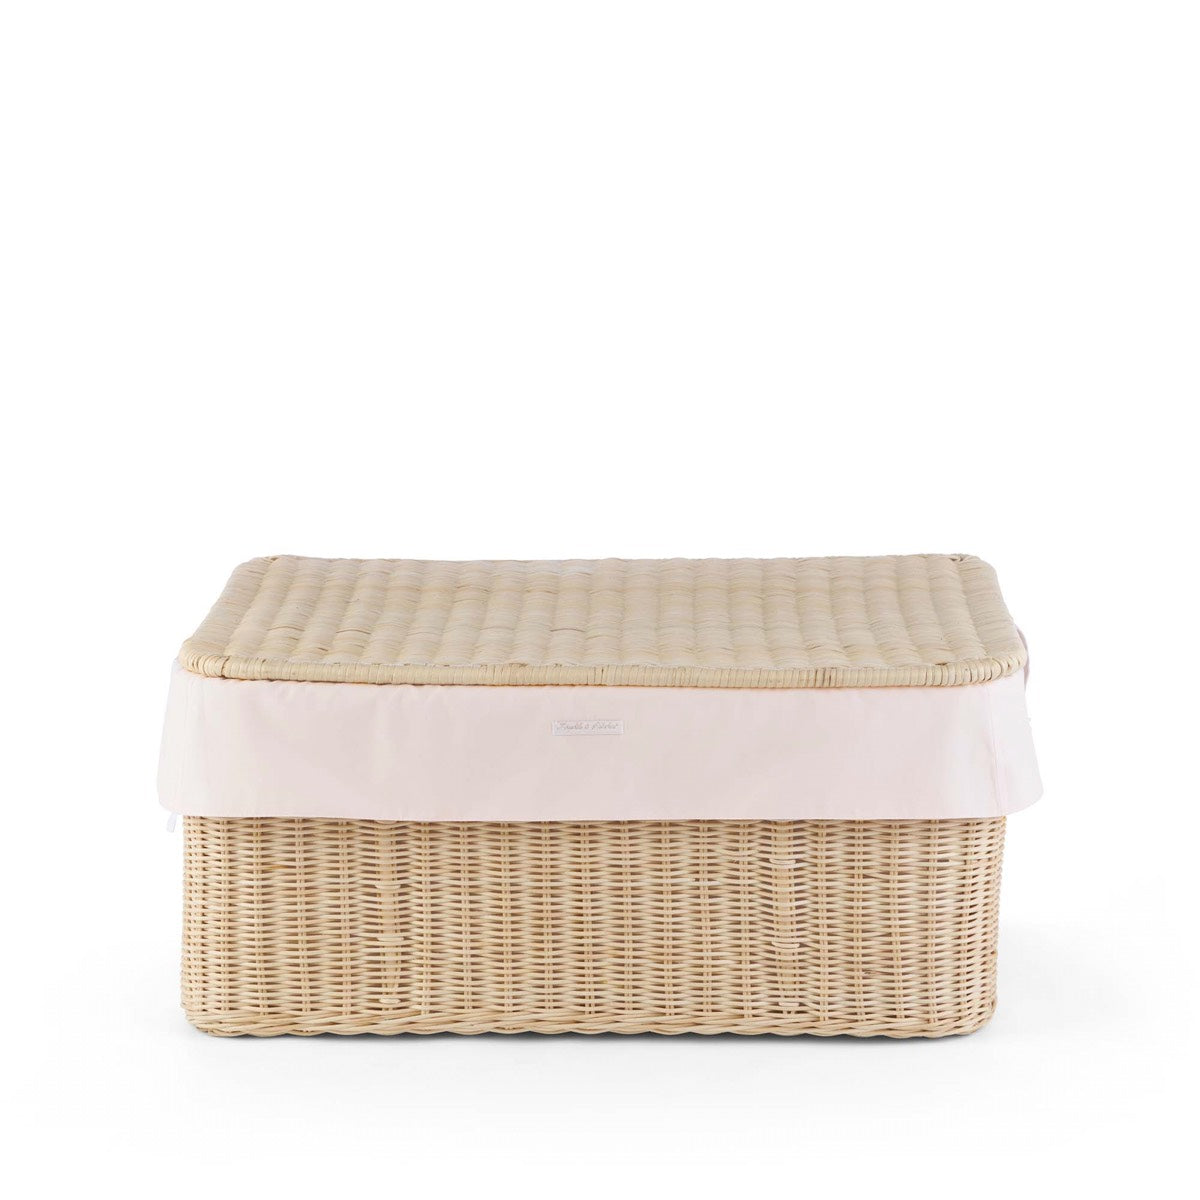 Theophile & Patachou Small Natural Wicker Toy Box and Cover - Cotton Pink